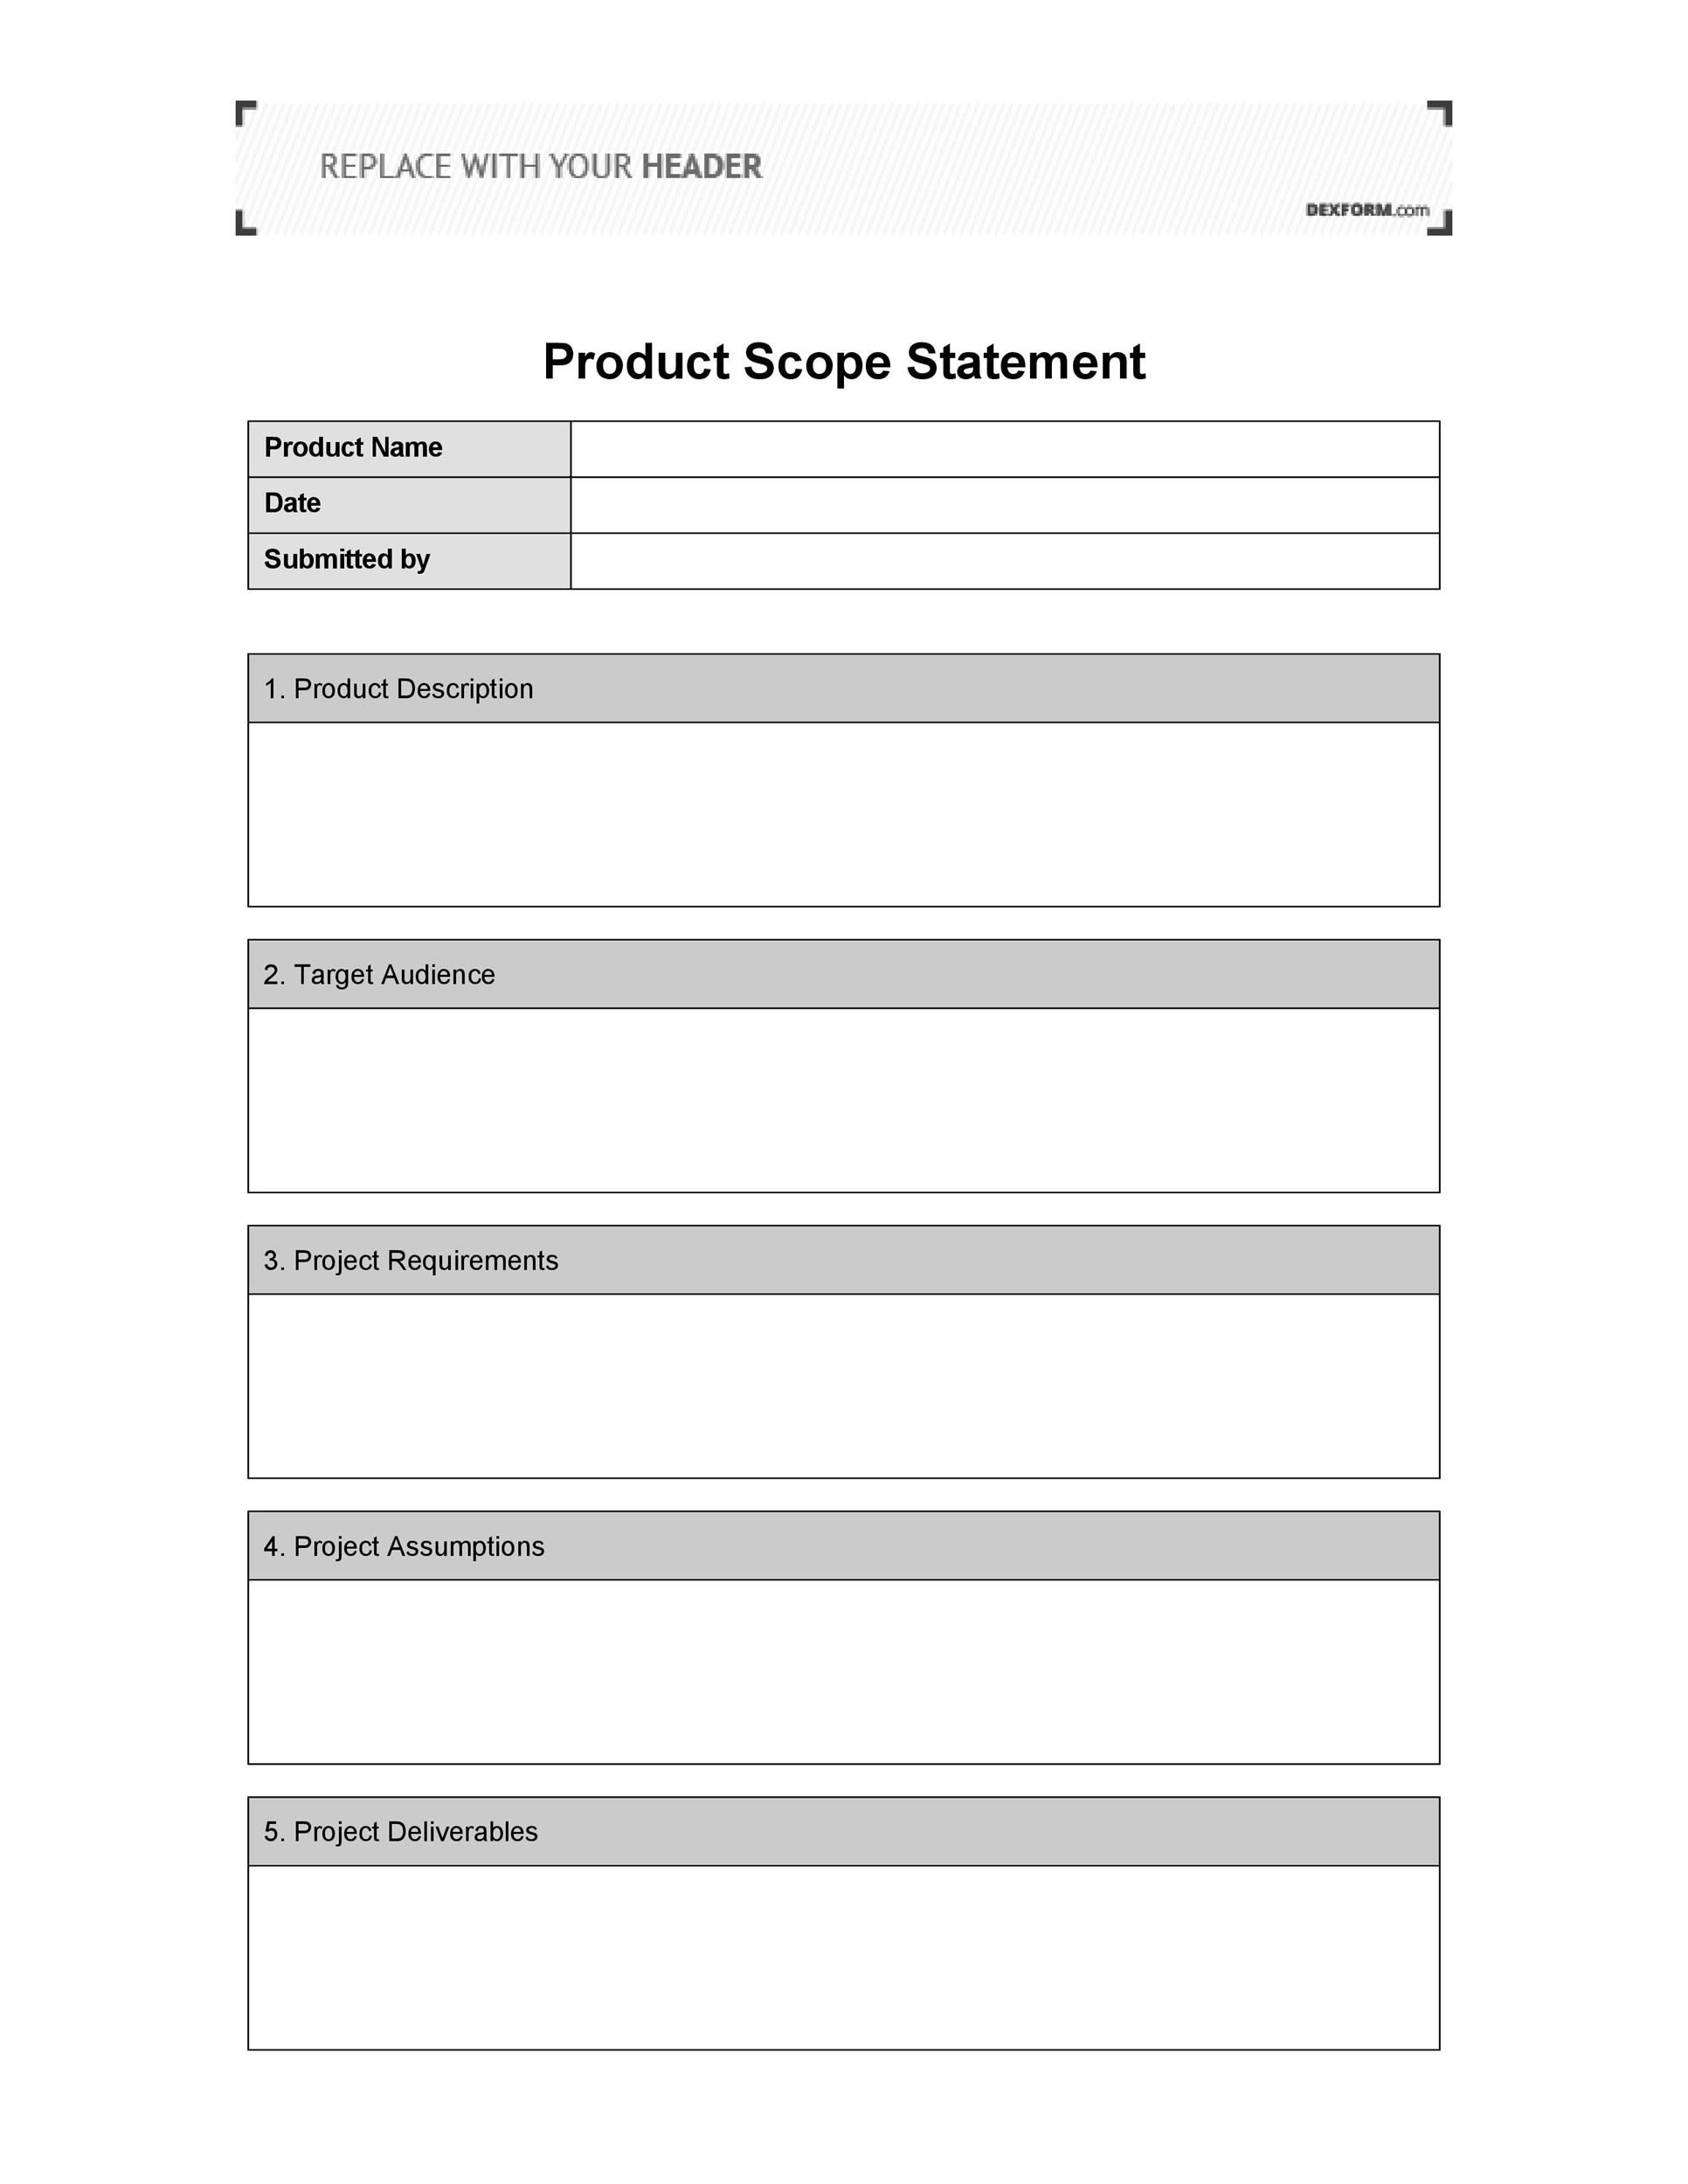 43 Project Scope Statement Templates Examples ᐅ Templatelab